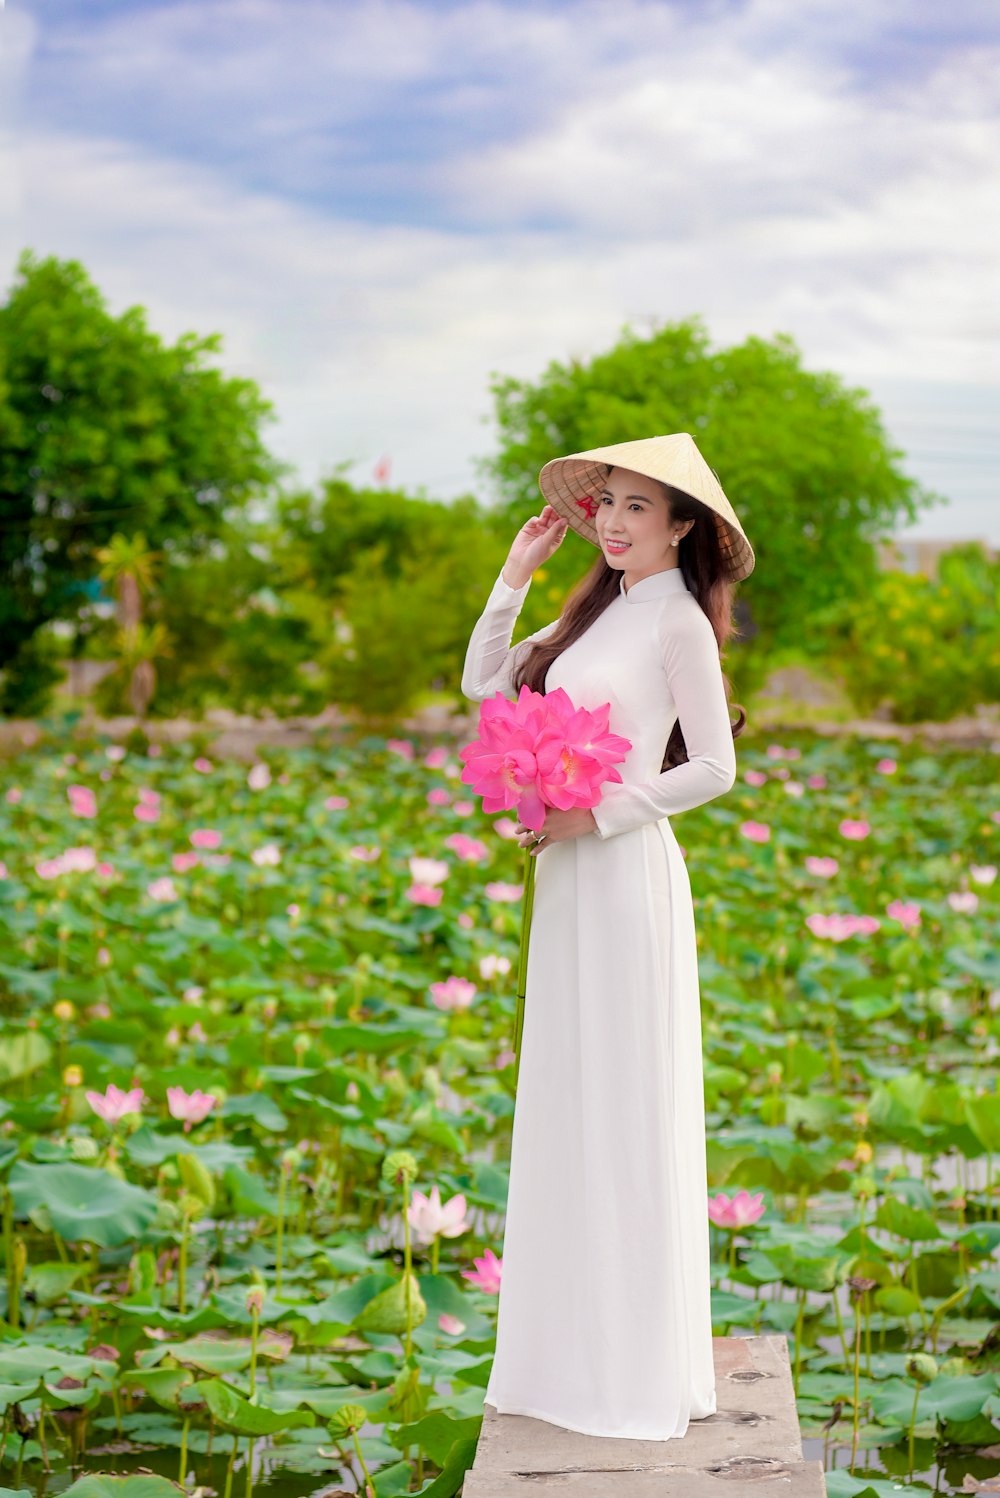 woman in white dress standing on flower field during daytime